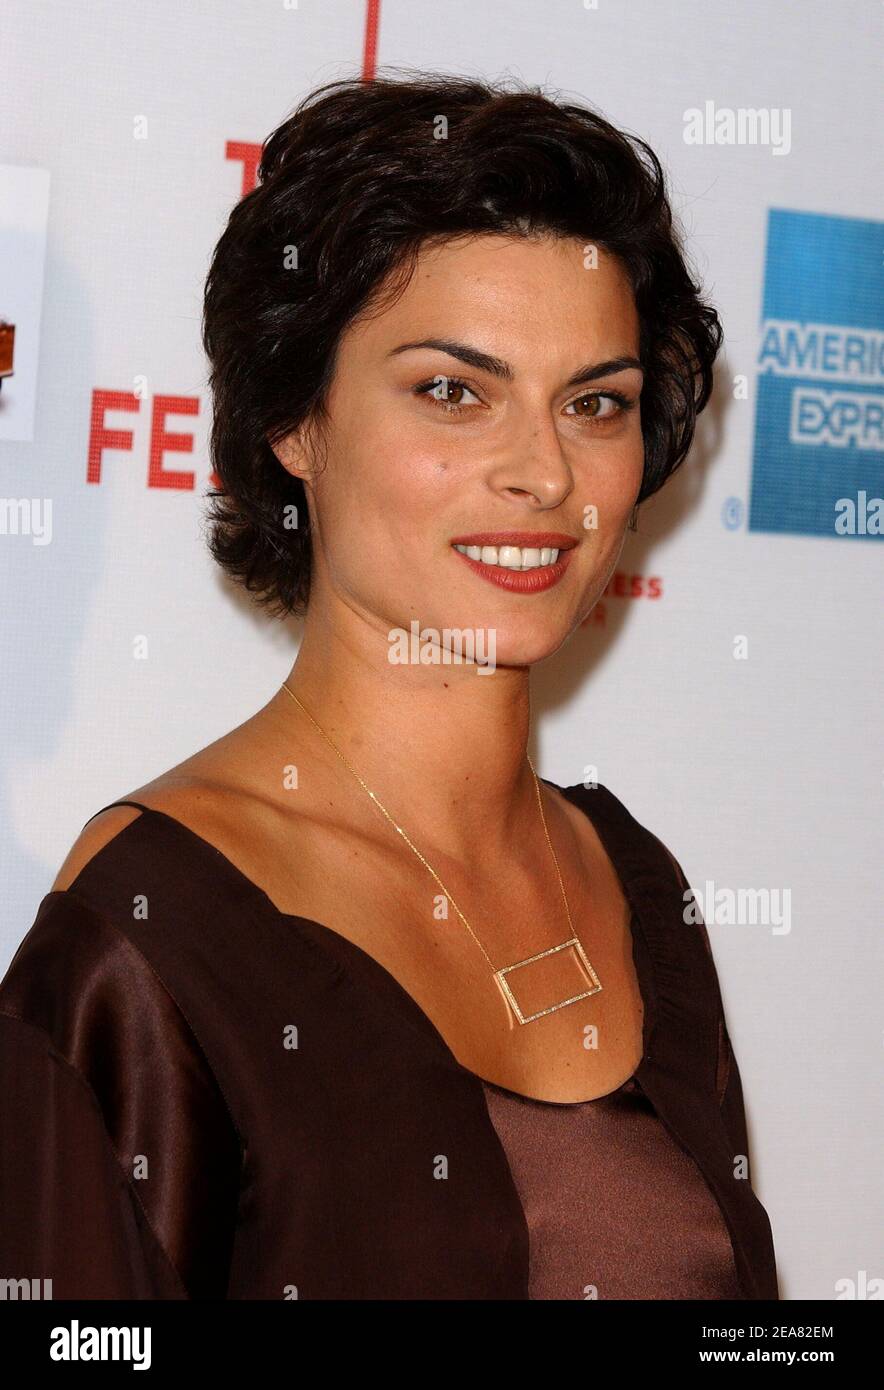 Magali Amadei arrives at the 2004 Tribeca Film Festival for the screening of his new film House Of D, held at the Tribeca Performing Arts Center in New York, on Friday, May 7, 2004. (Pictured : Magali Amadei). Photo by Nicolas Khayat/ABACA. Stock Photo